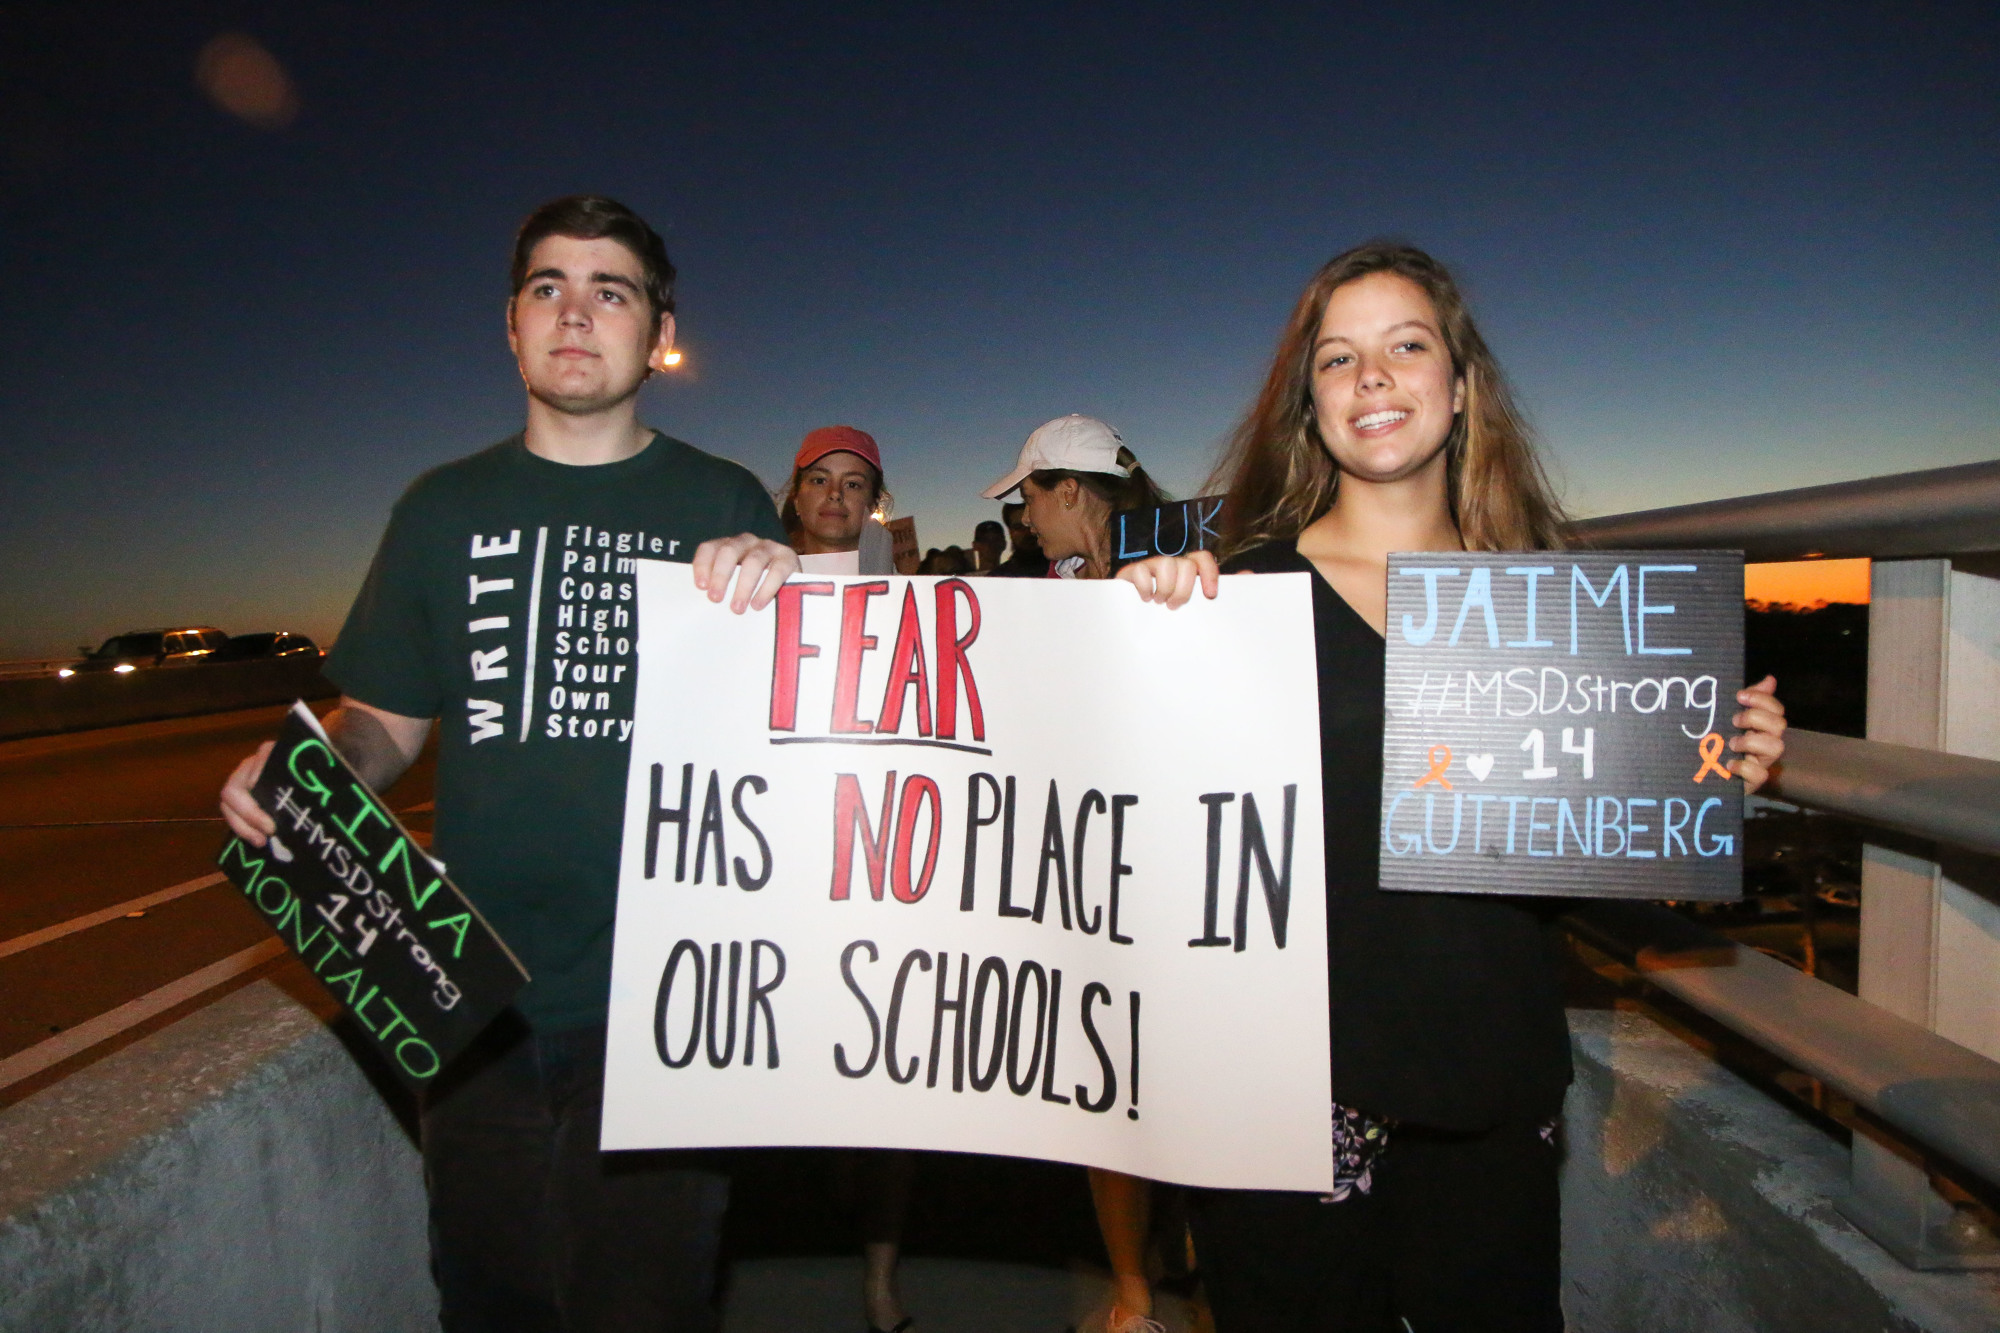 FPCHS SGA President Tyler Perry and SGA member Alyssa Santore lead the march over the bridge. Photo by Paige Wilson